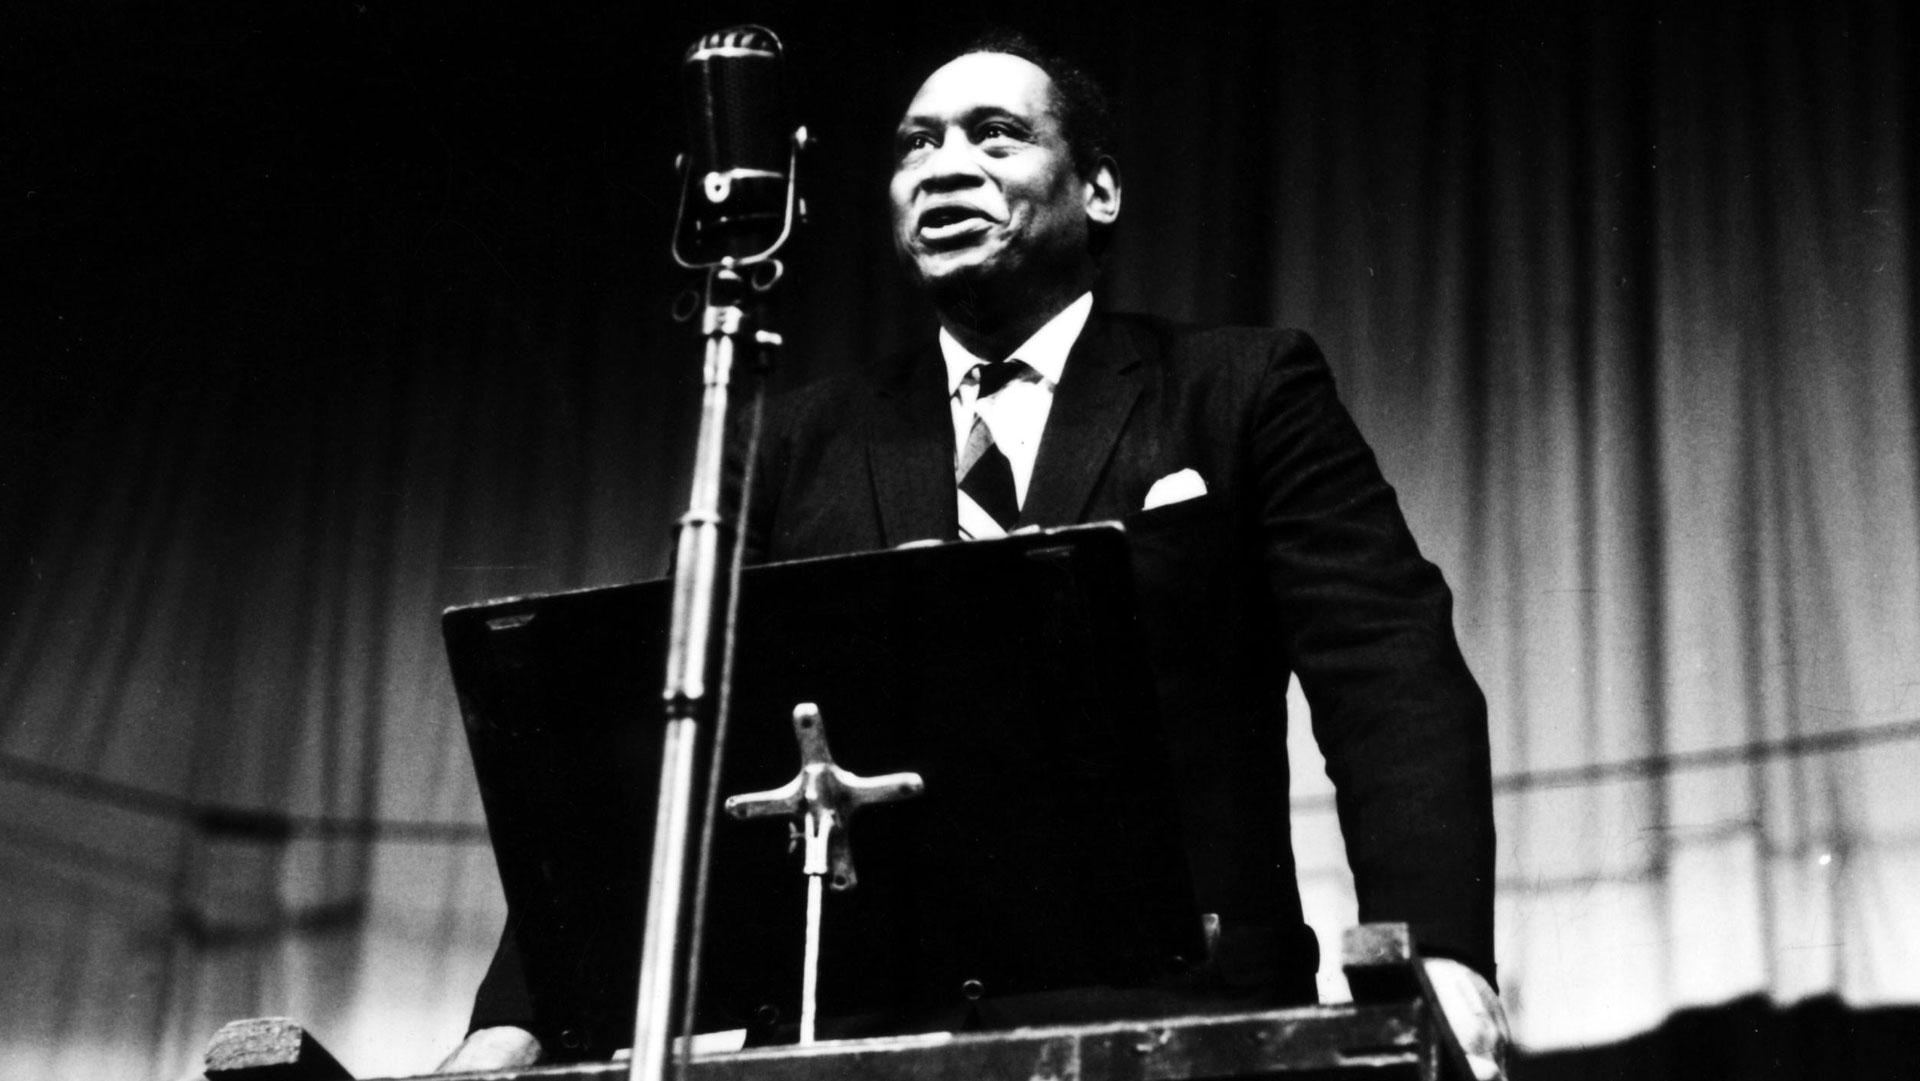 Paul Robeson standing at podium at National Eisteddfod, Ebbw Vale 1958